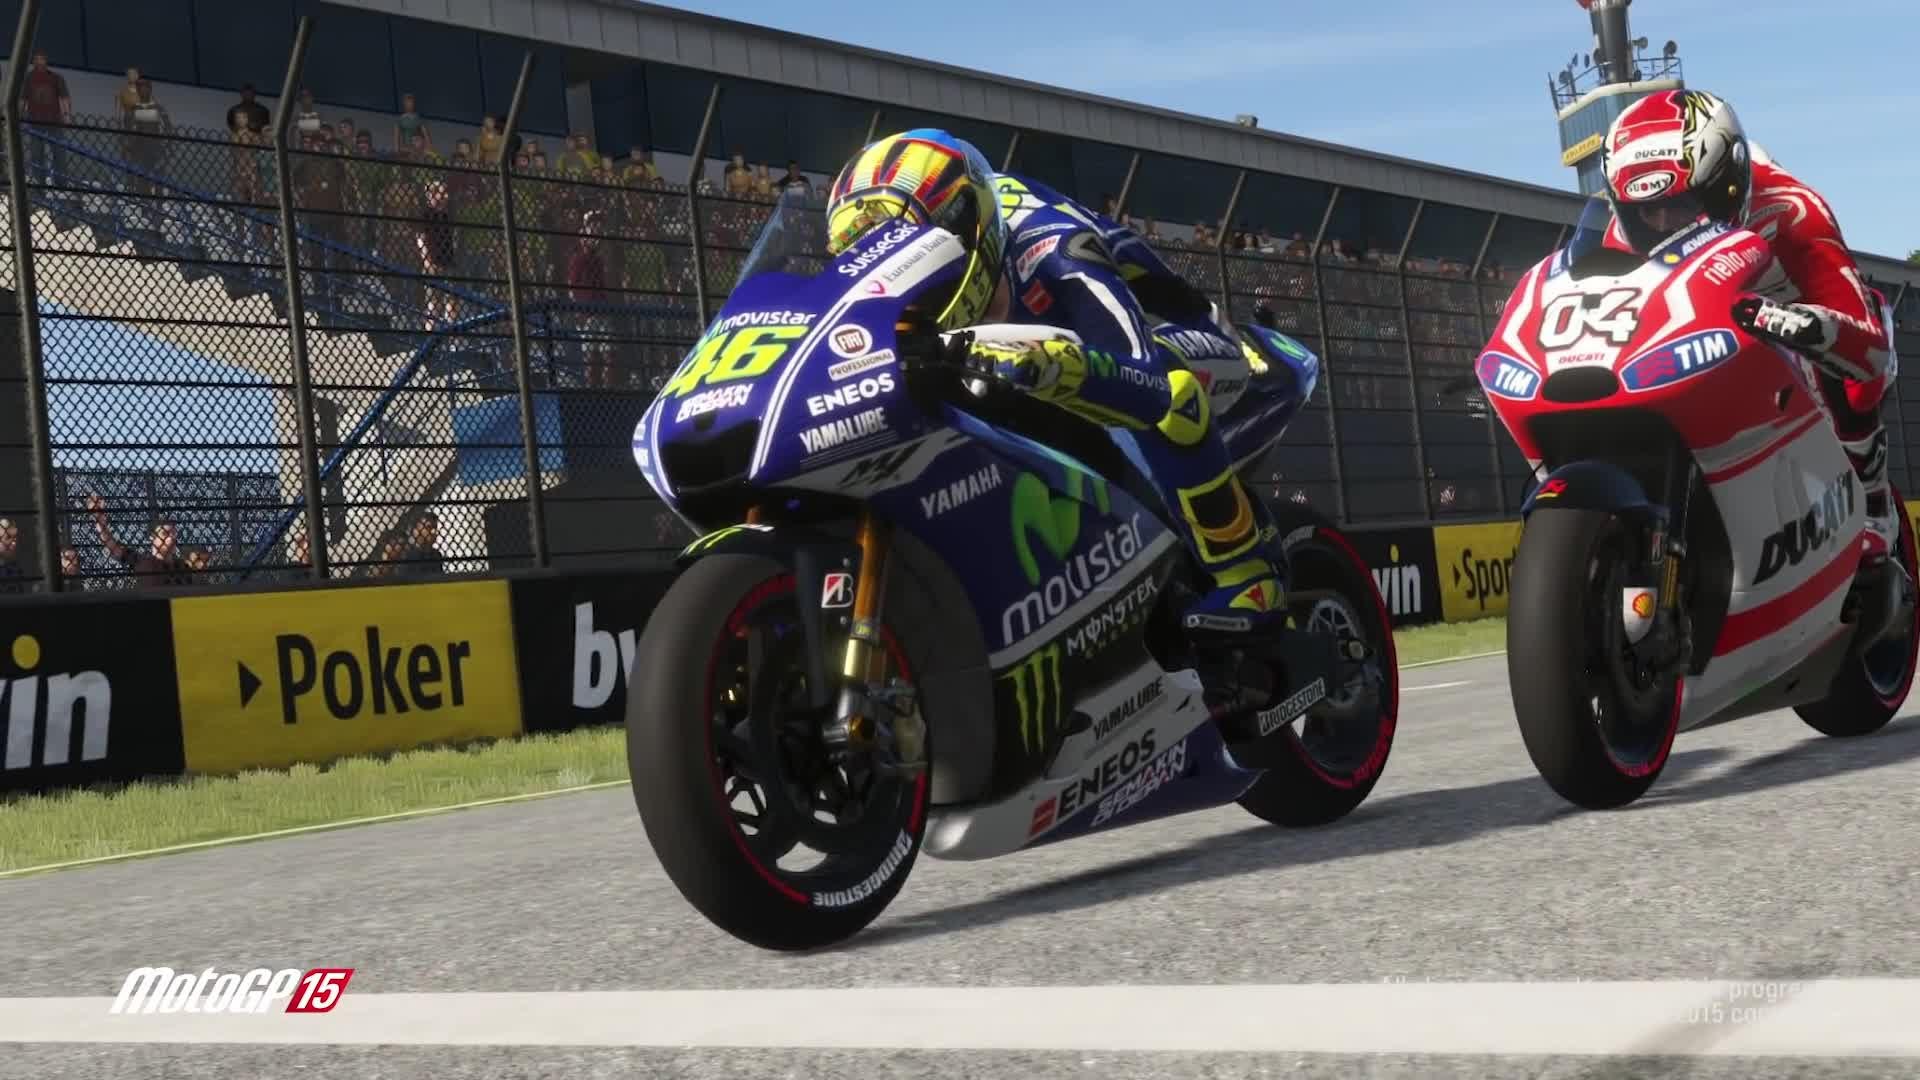 If you prefer simulation-style games, or if you’re into the MotoGP championship, this is your game. The 2015 release sees luscious new graphics, new physics, and an expanded career mode featuring real-world riders. | <b>For:</b> PC, PS4, Xbox One, PS3, Xbox 360